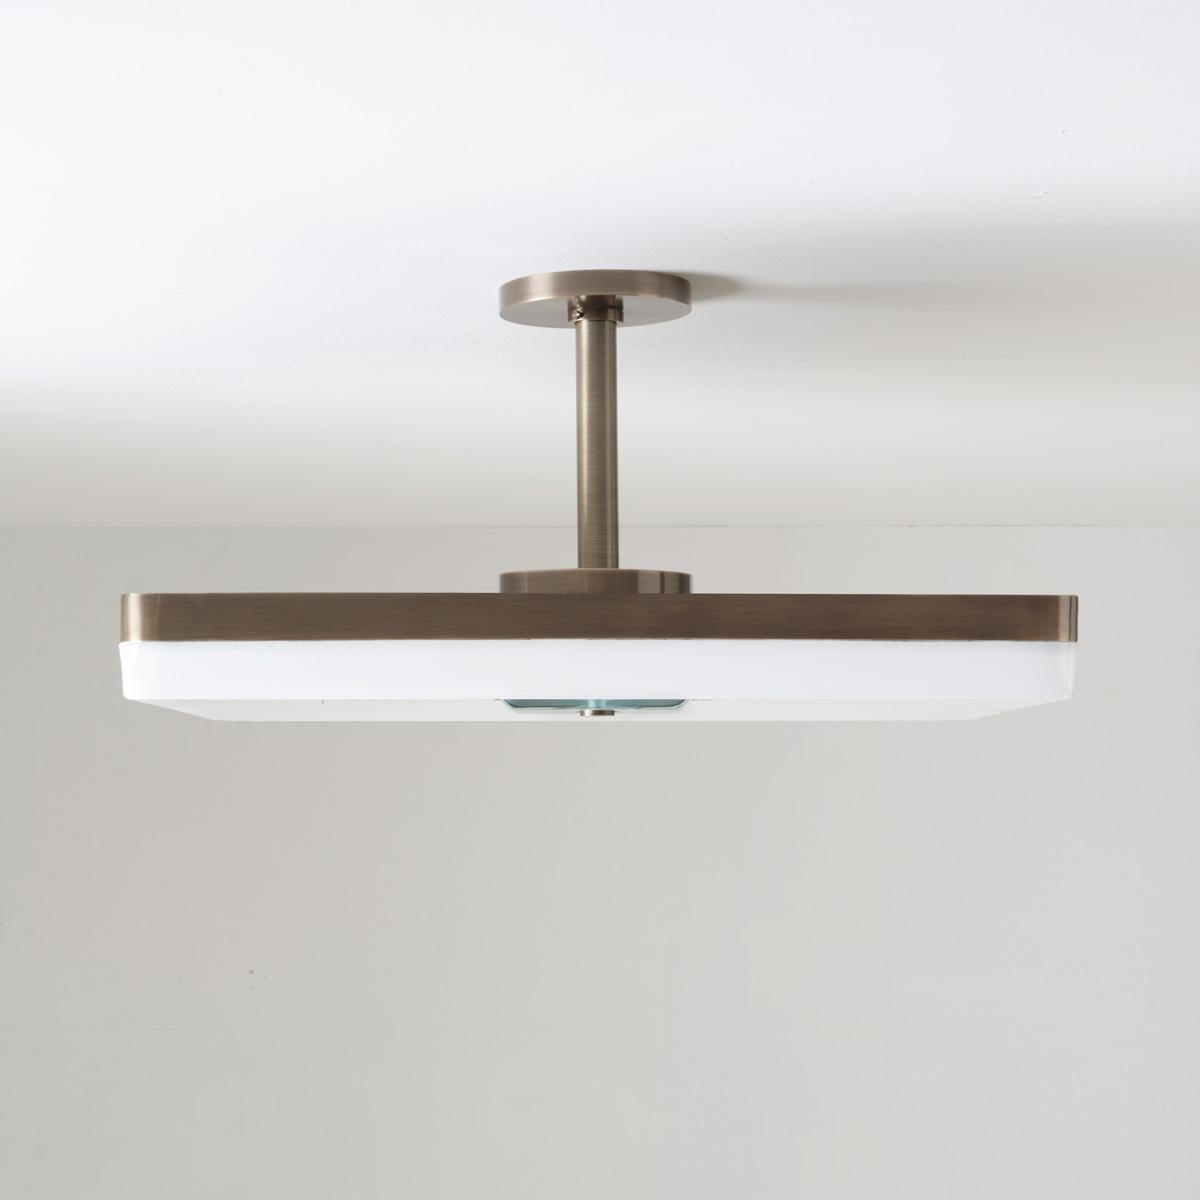 Italian Iris Square Ceiling Light by Gaspare Asaro. Satin Brass Finish For Sale